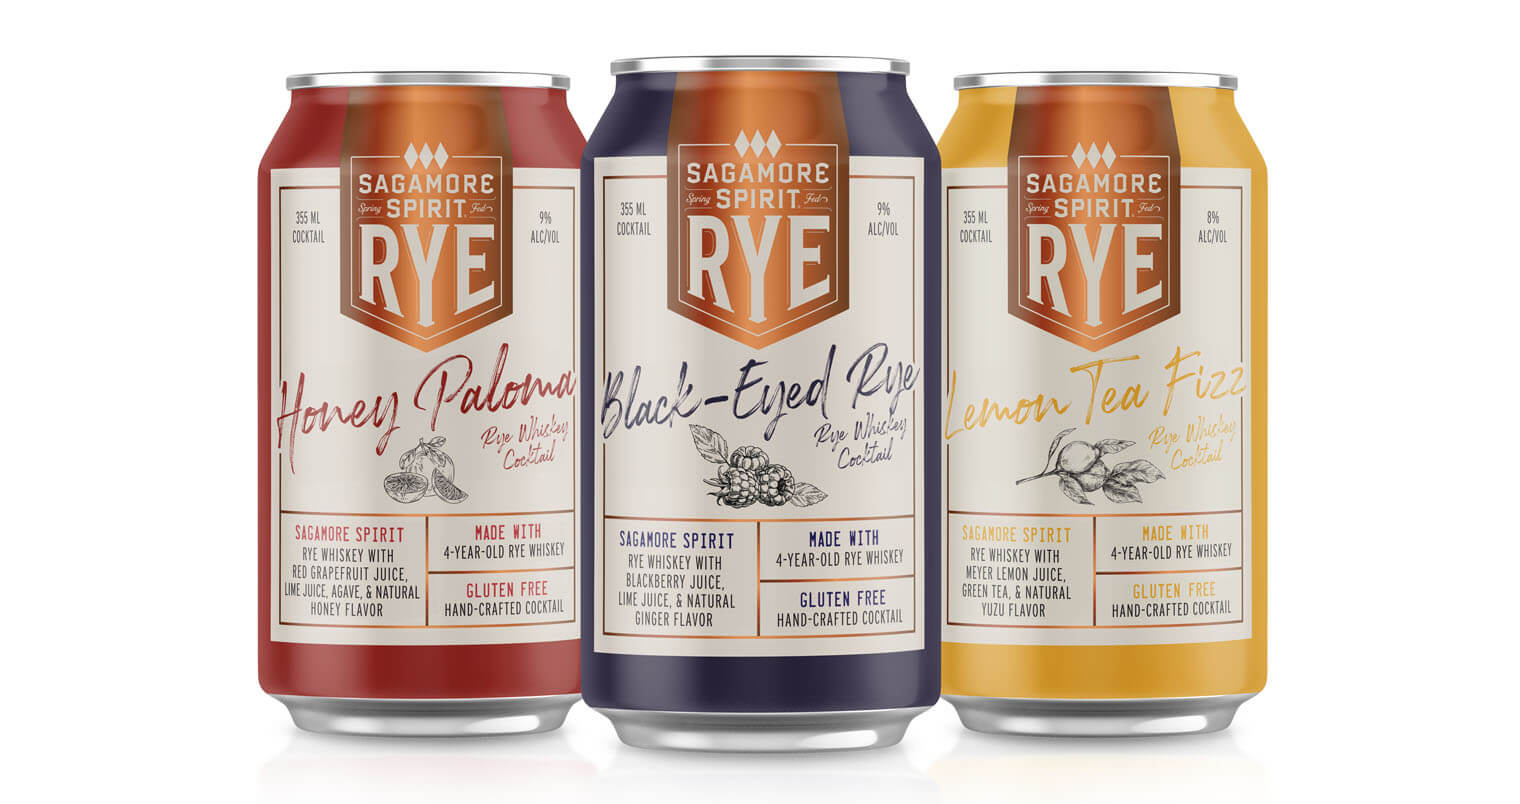 Sagamore Spirit RTD Canned Cocktails, featured image